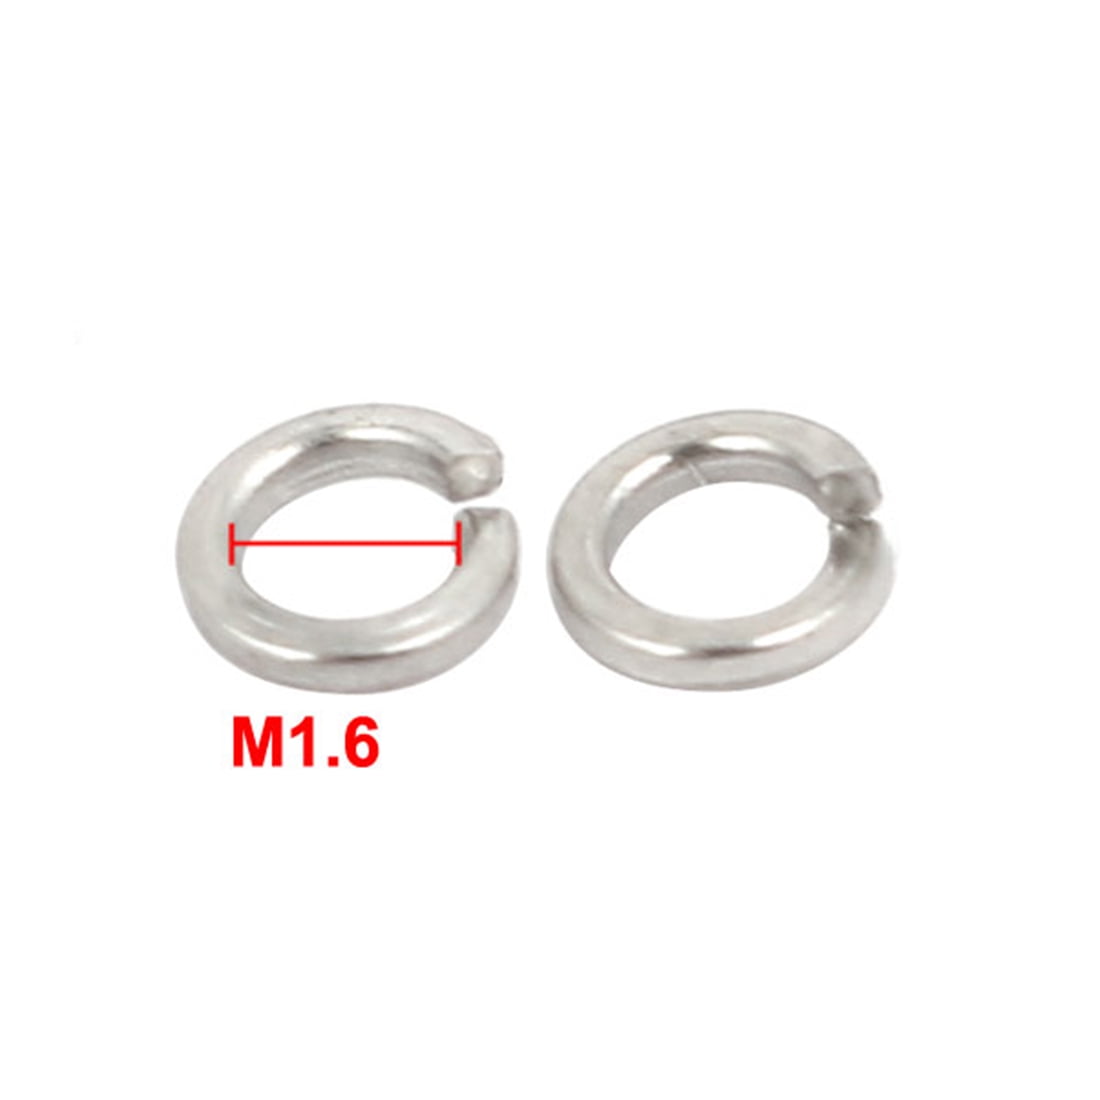 60pcs M1.6,2,2.5,3,4,5 Split Lock Spring Coil Washers Kit A2 304 Stainless Steel 